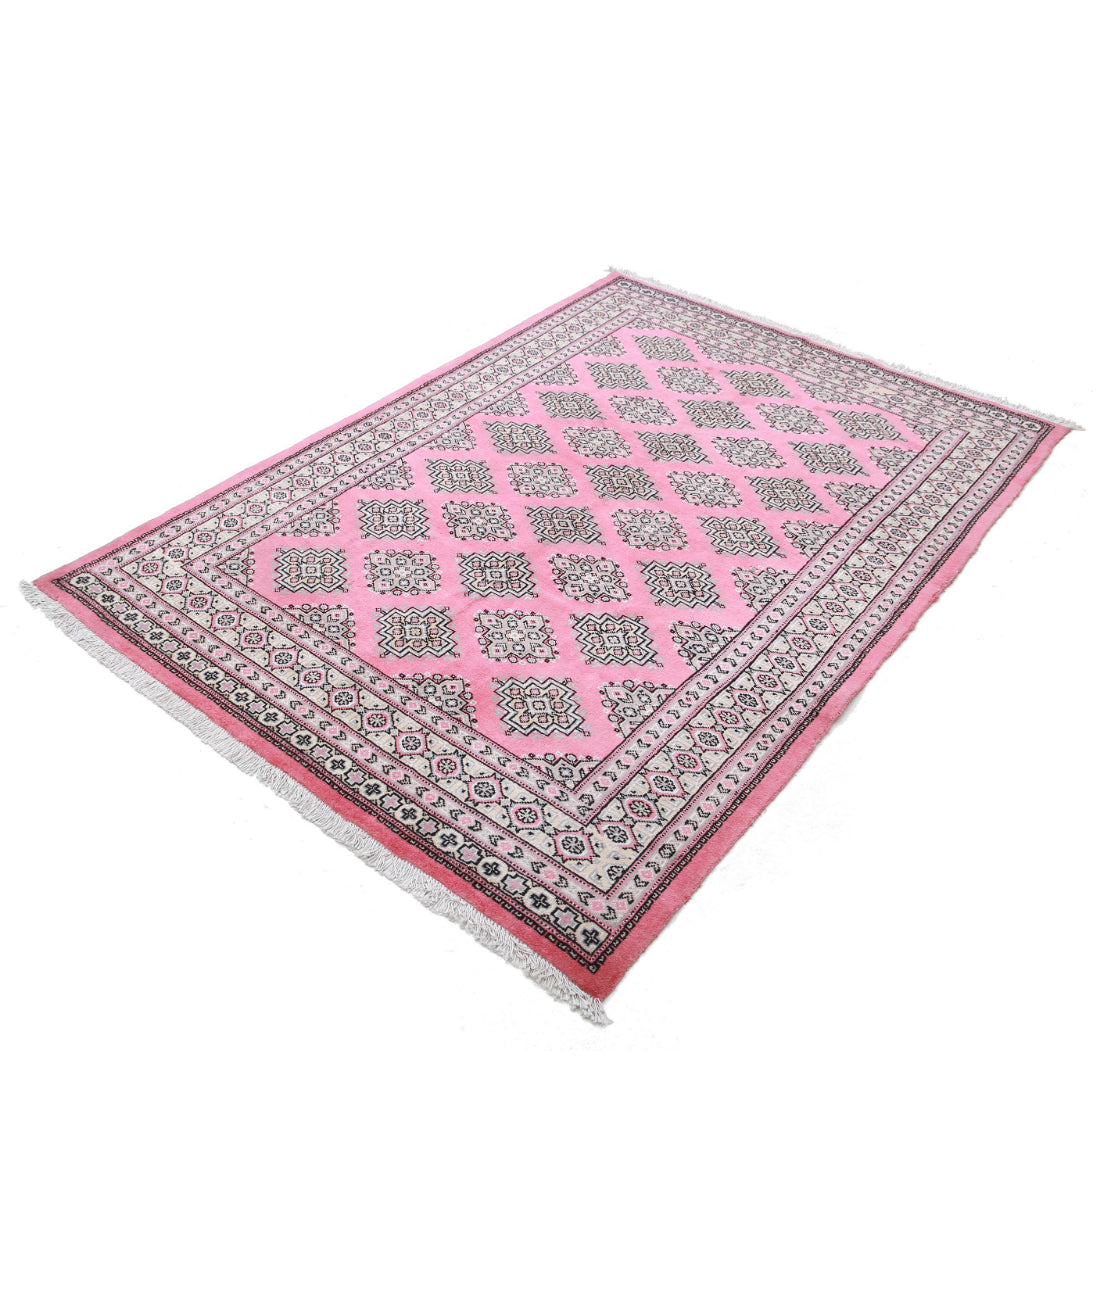 Hand Knotted Tribal Bokhara Wool Rug - 4'7'' x 6'5'' 4'7'' x 6'5'' (138 X 193) / Pink / Gold